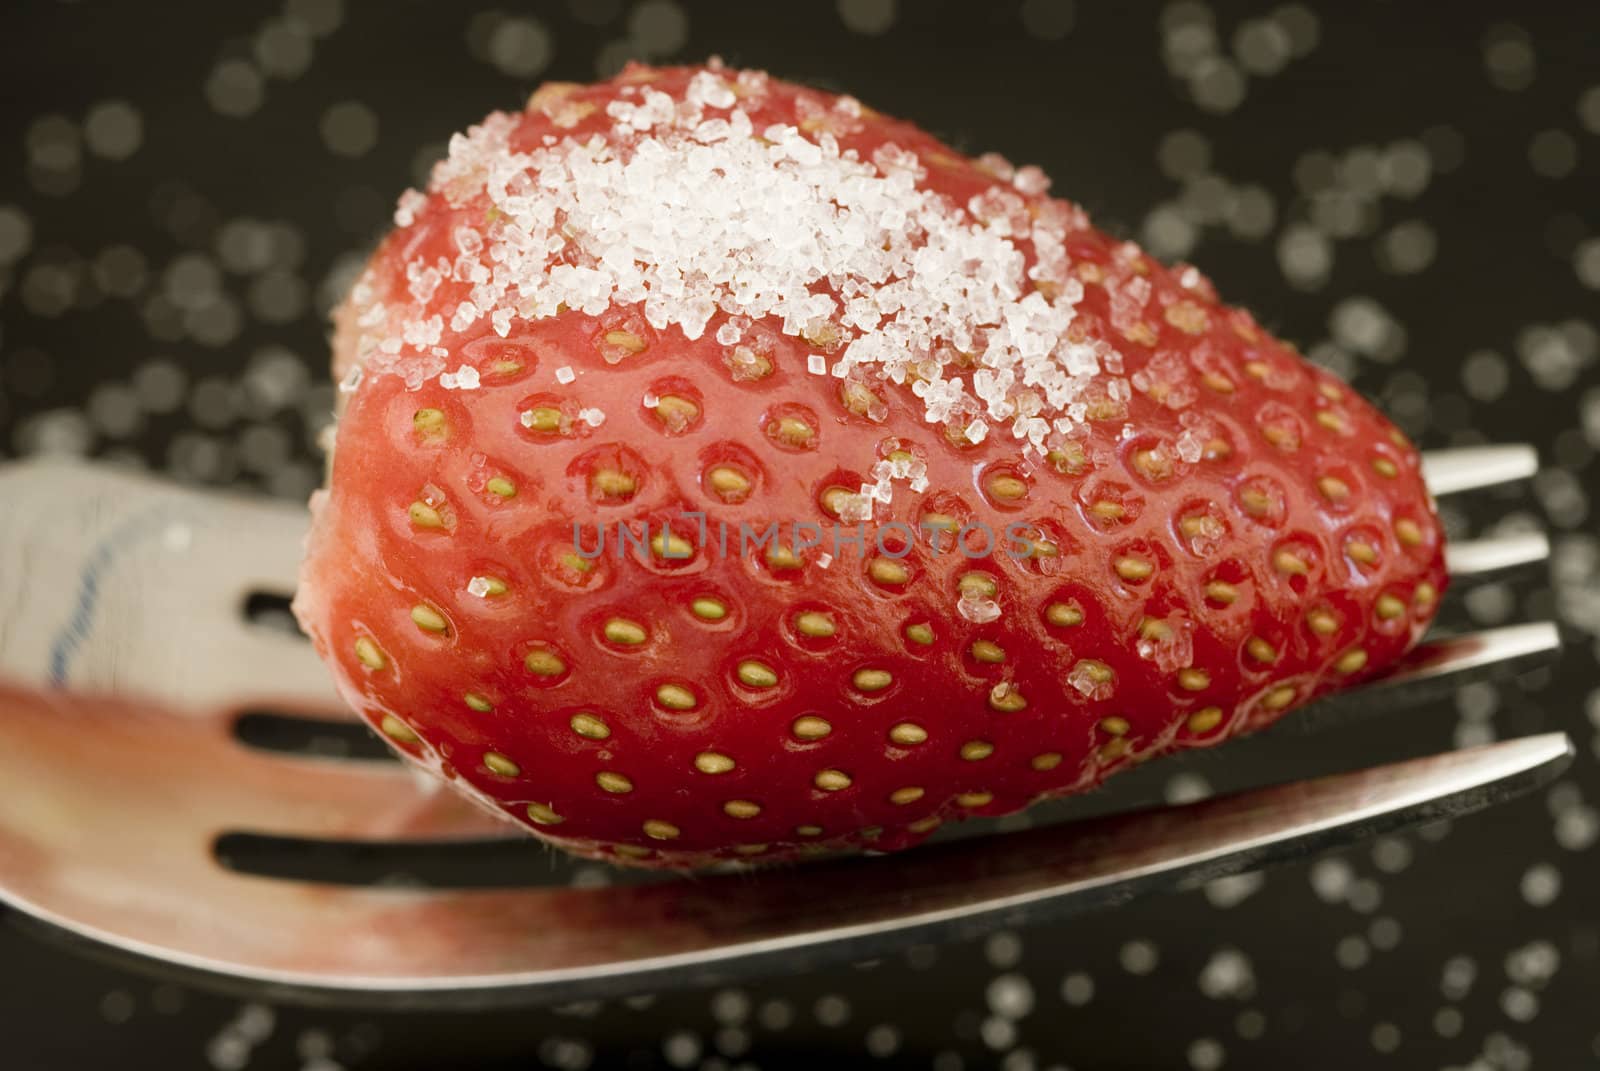 a ripe red strawberry, sprinkled with sugar, ready to eat